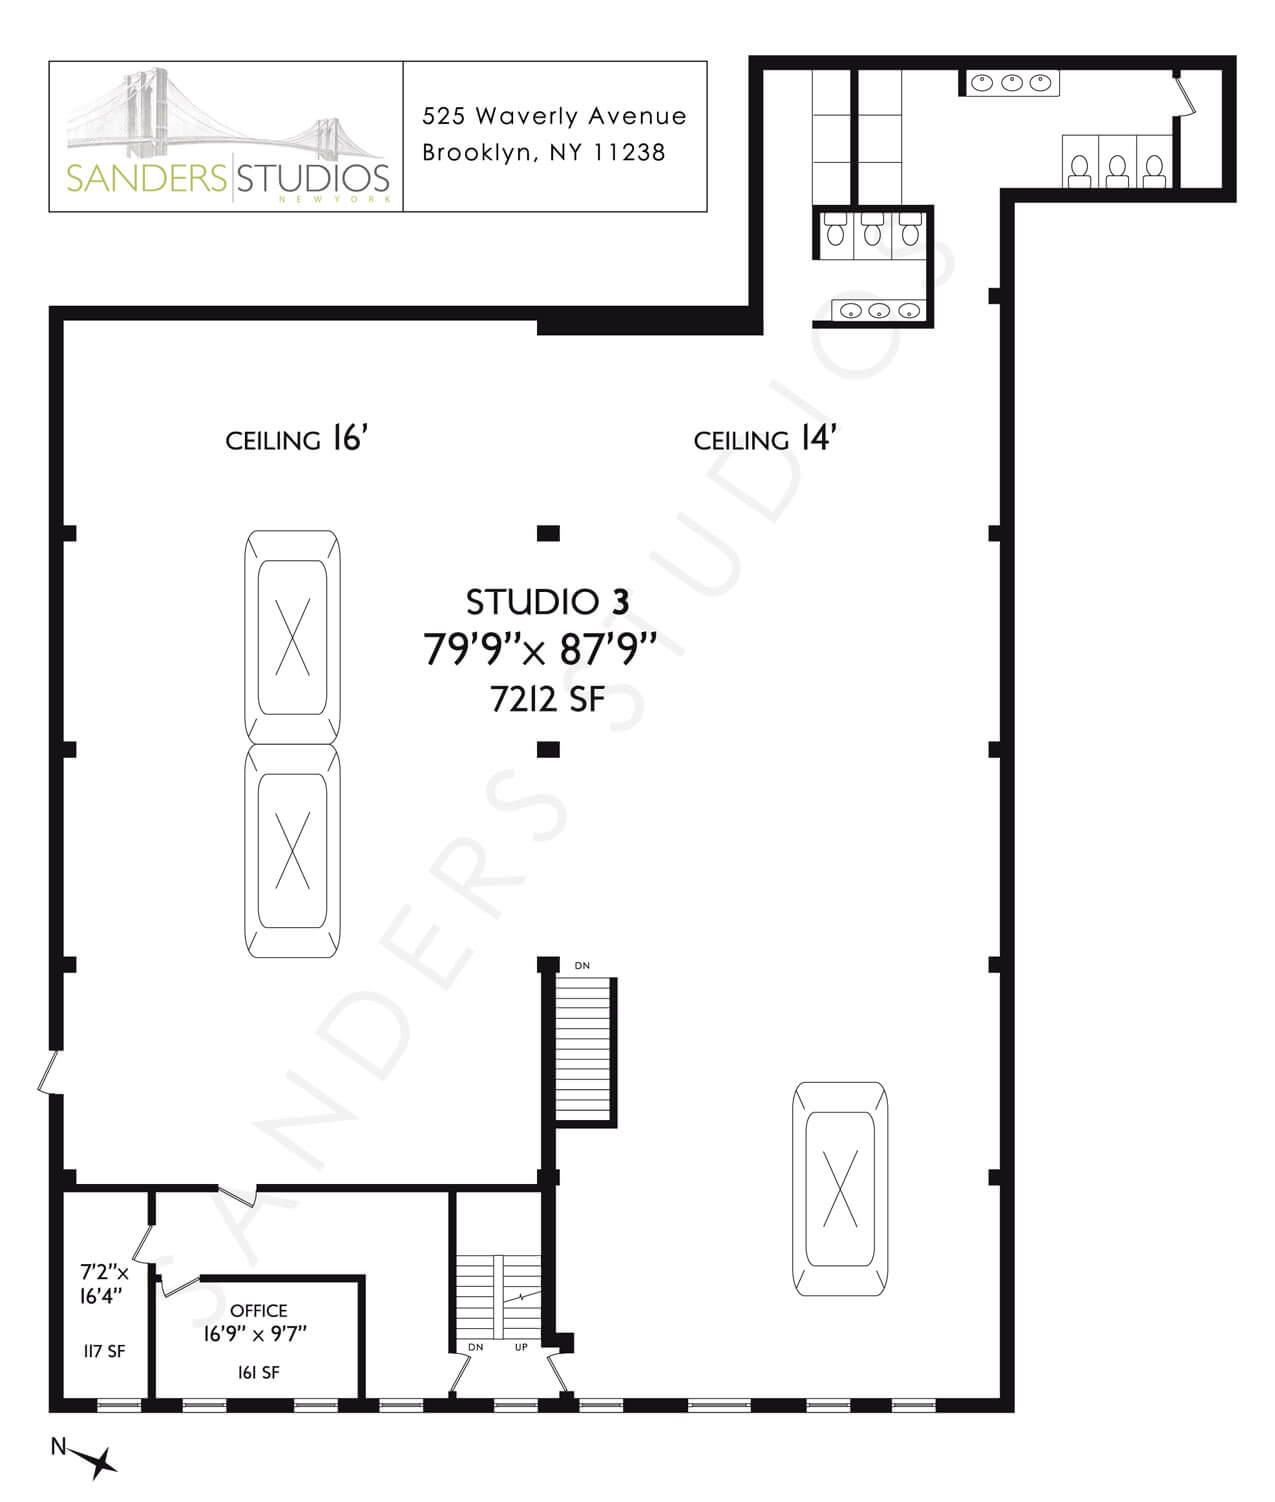 A floor plan of a studio apartment with a lot of furniture.